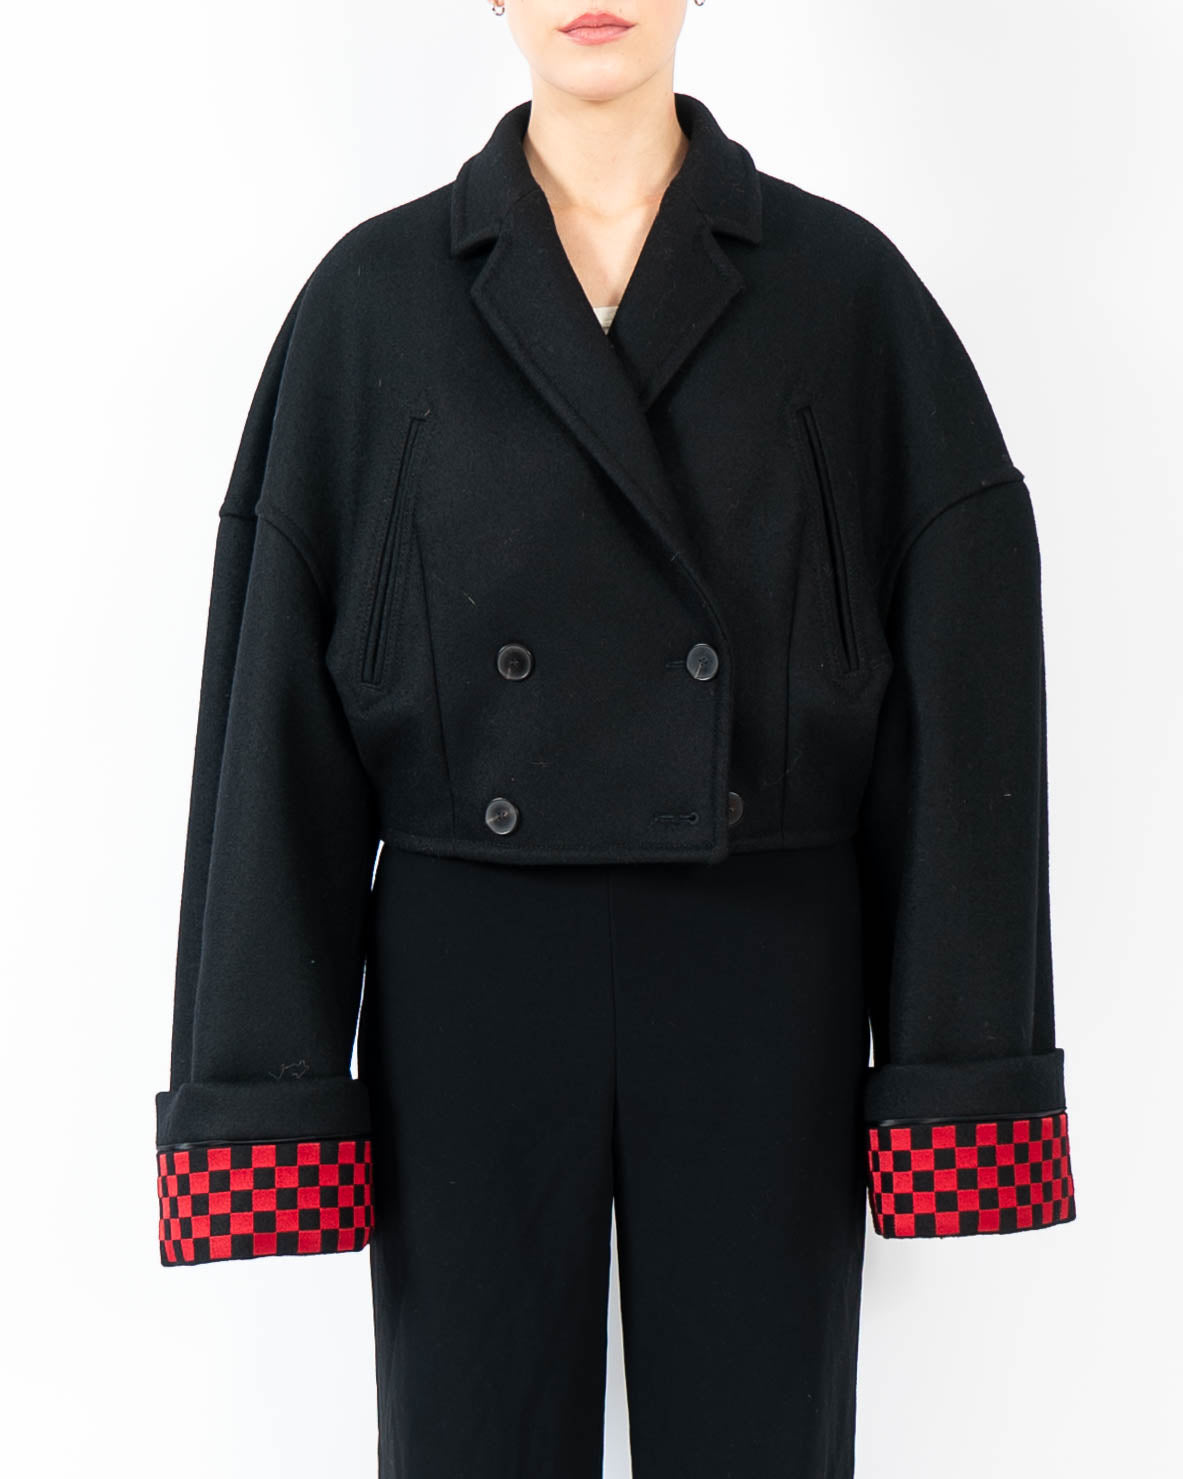 FW19 Cropped Overcoat in Black Wool with Checked Embroidery